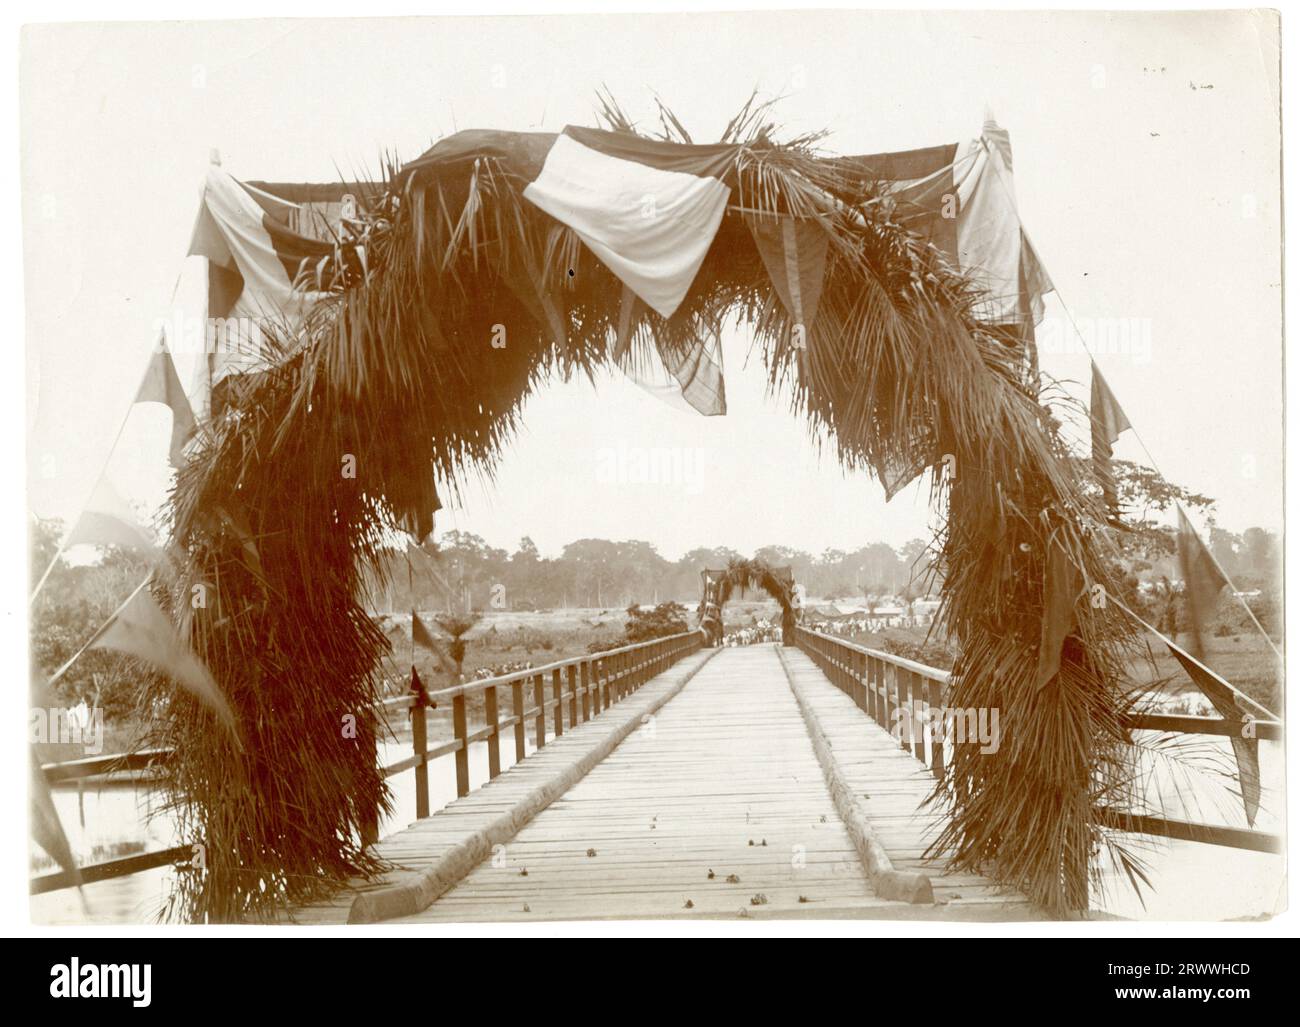 View across the Pusa Bridge in Nsawam, decorated ready for its opening by the Governor with flags and foliage strung up at either end. A large crowd of people are visible, congregated at the far side. Original manuscript caption: The new 'Pusa' bridge - opened by Sir Hugh Clifford - 1-7-18. Nsawam. Gold Coast. Stock Photo